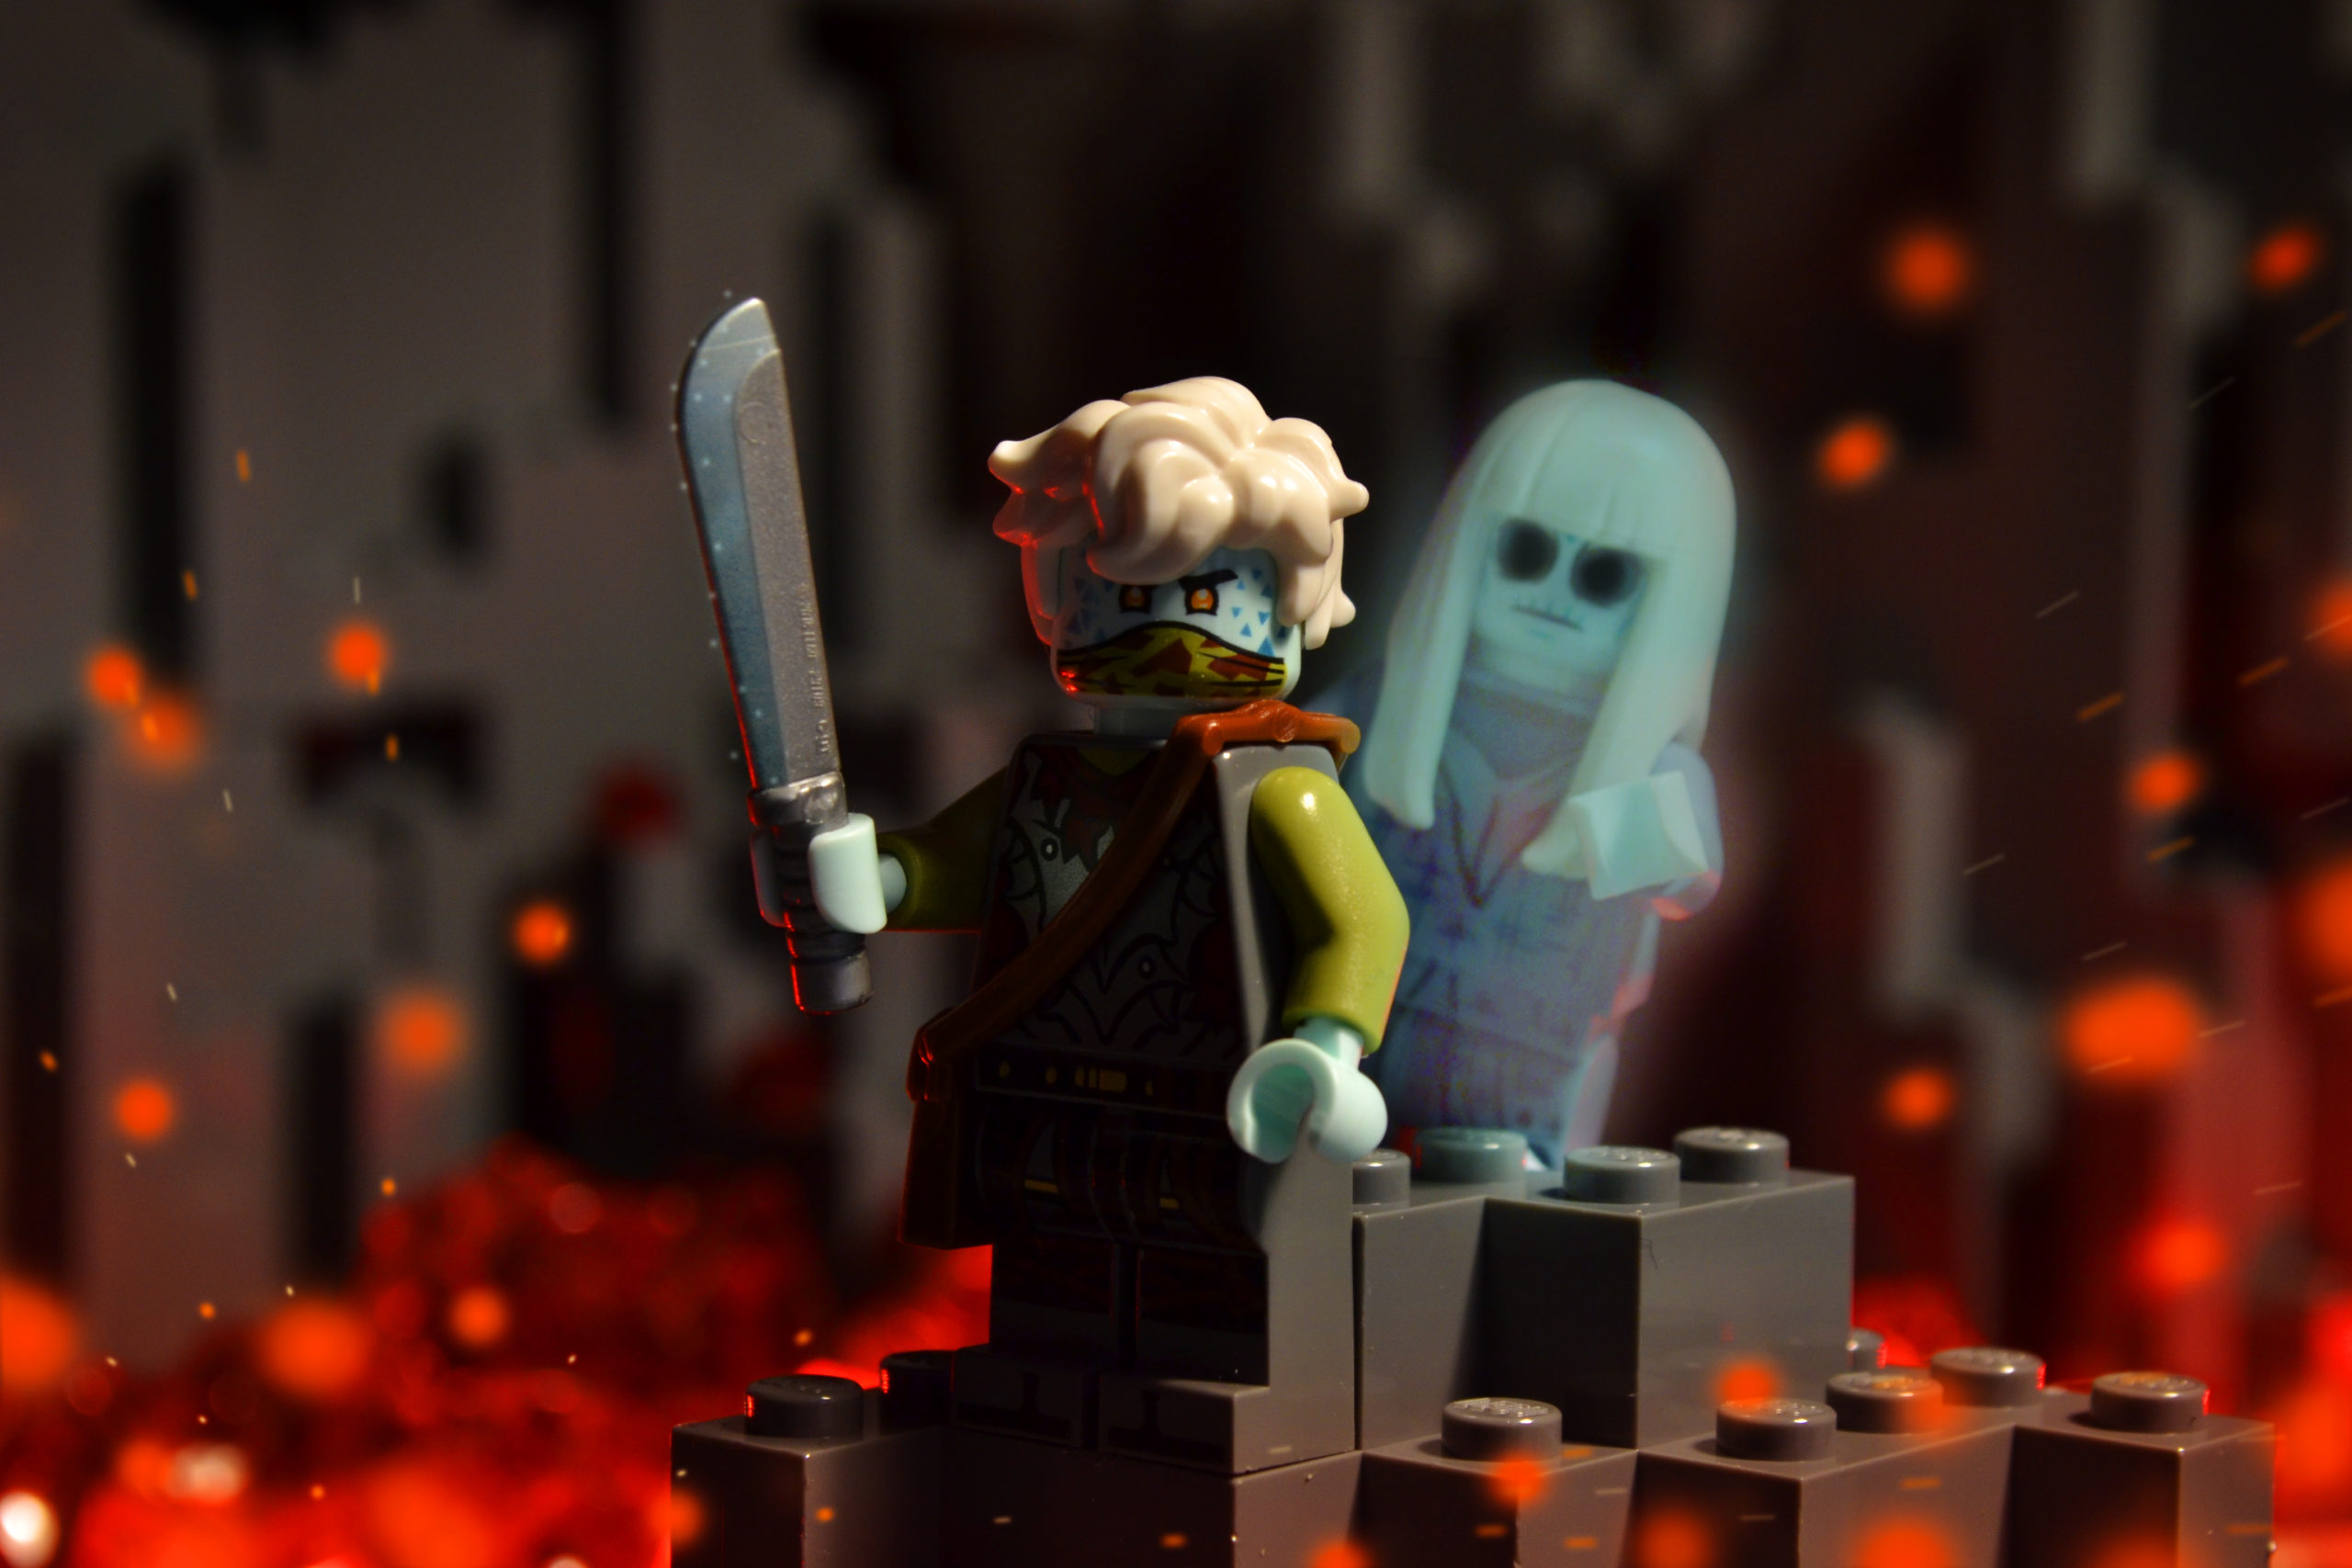 Been putting together Lego mini figures for my D&D characters for